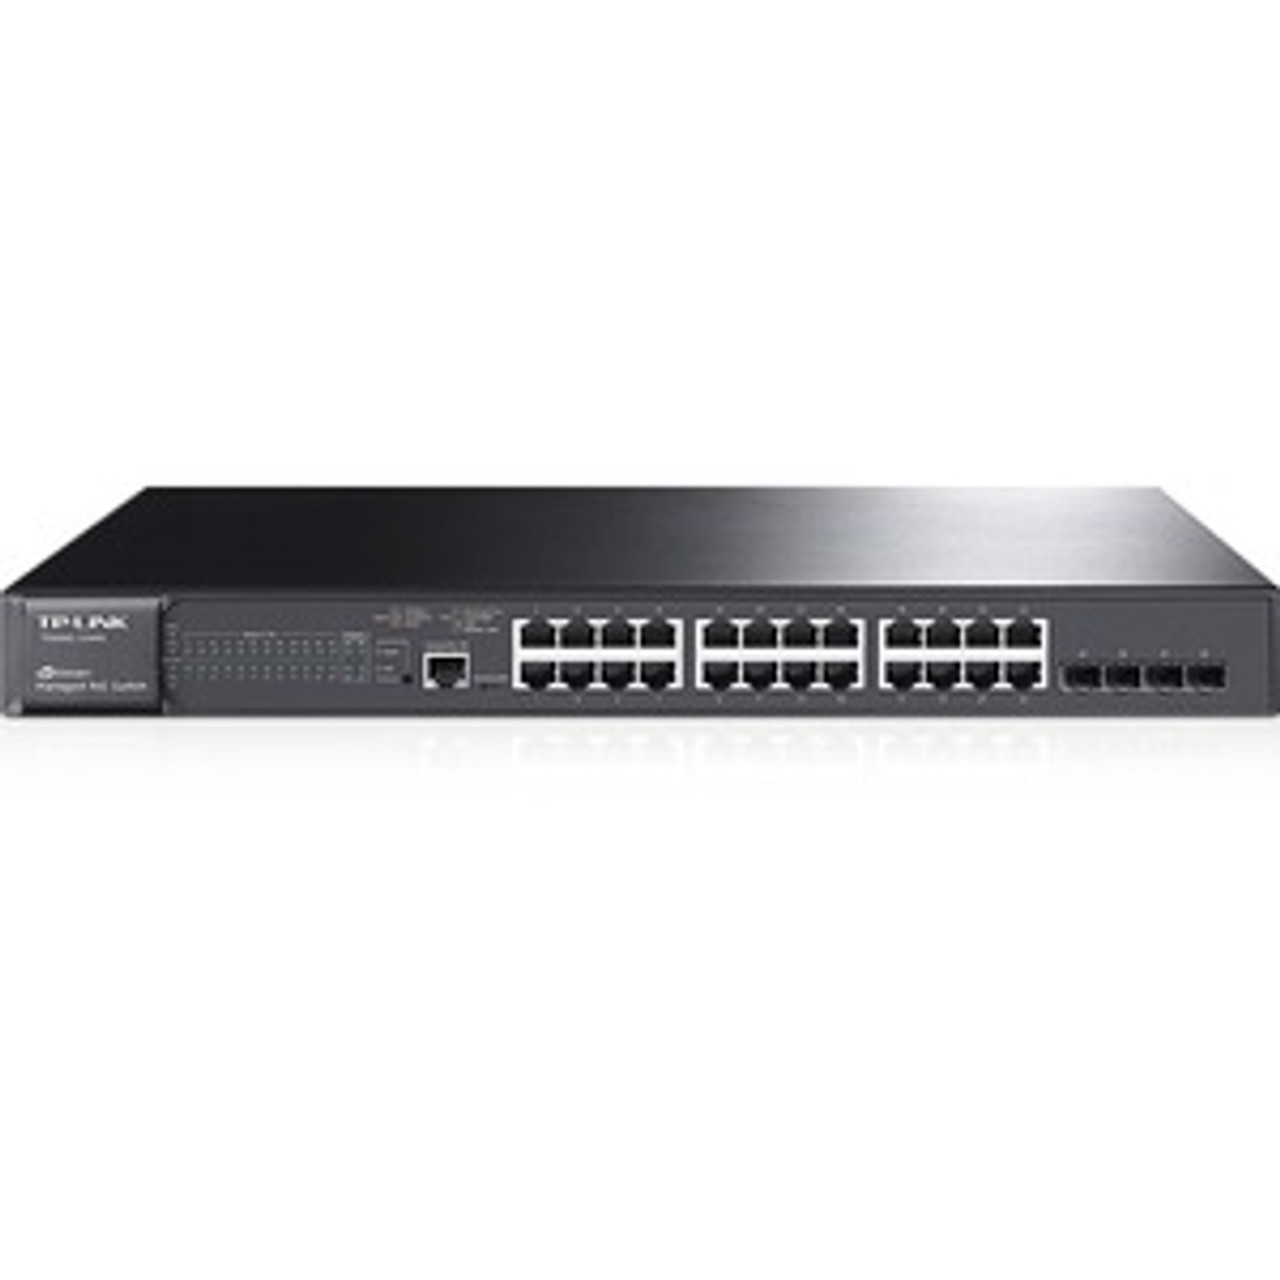 T2600G-28MPSTLSG3424 TP-Link JetStream 24-Port Gigabit L2 Managed PoE+ Switch with 4 SFP Slots - 24 Ports - Manageable - 10/100/1000Base-T, 1000Base-X - 4 Layer